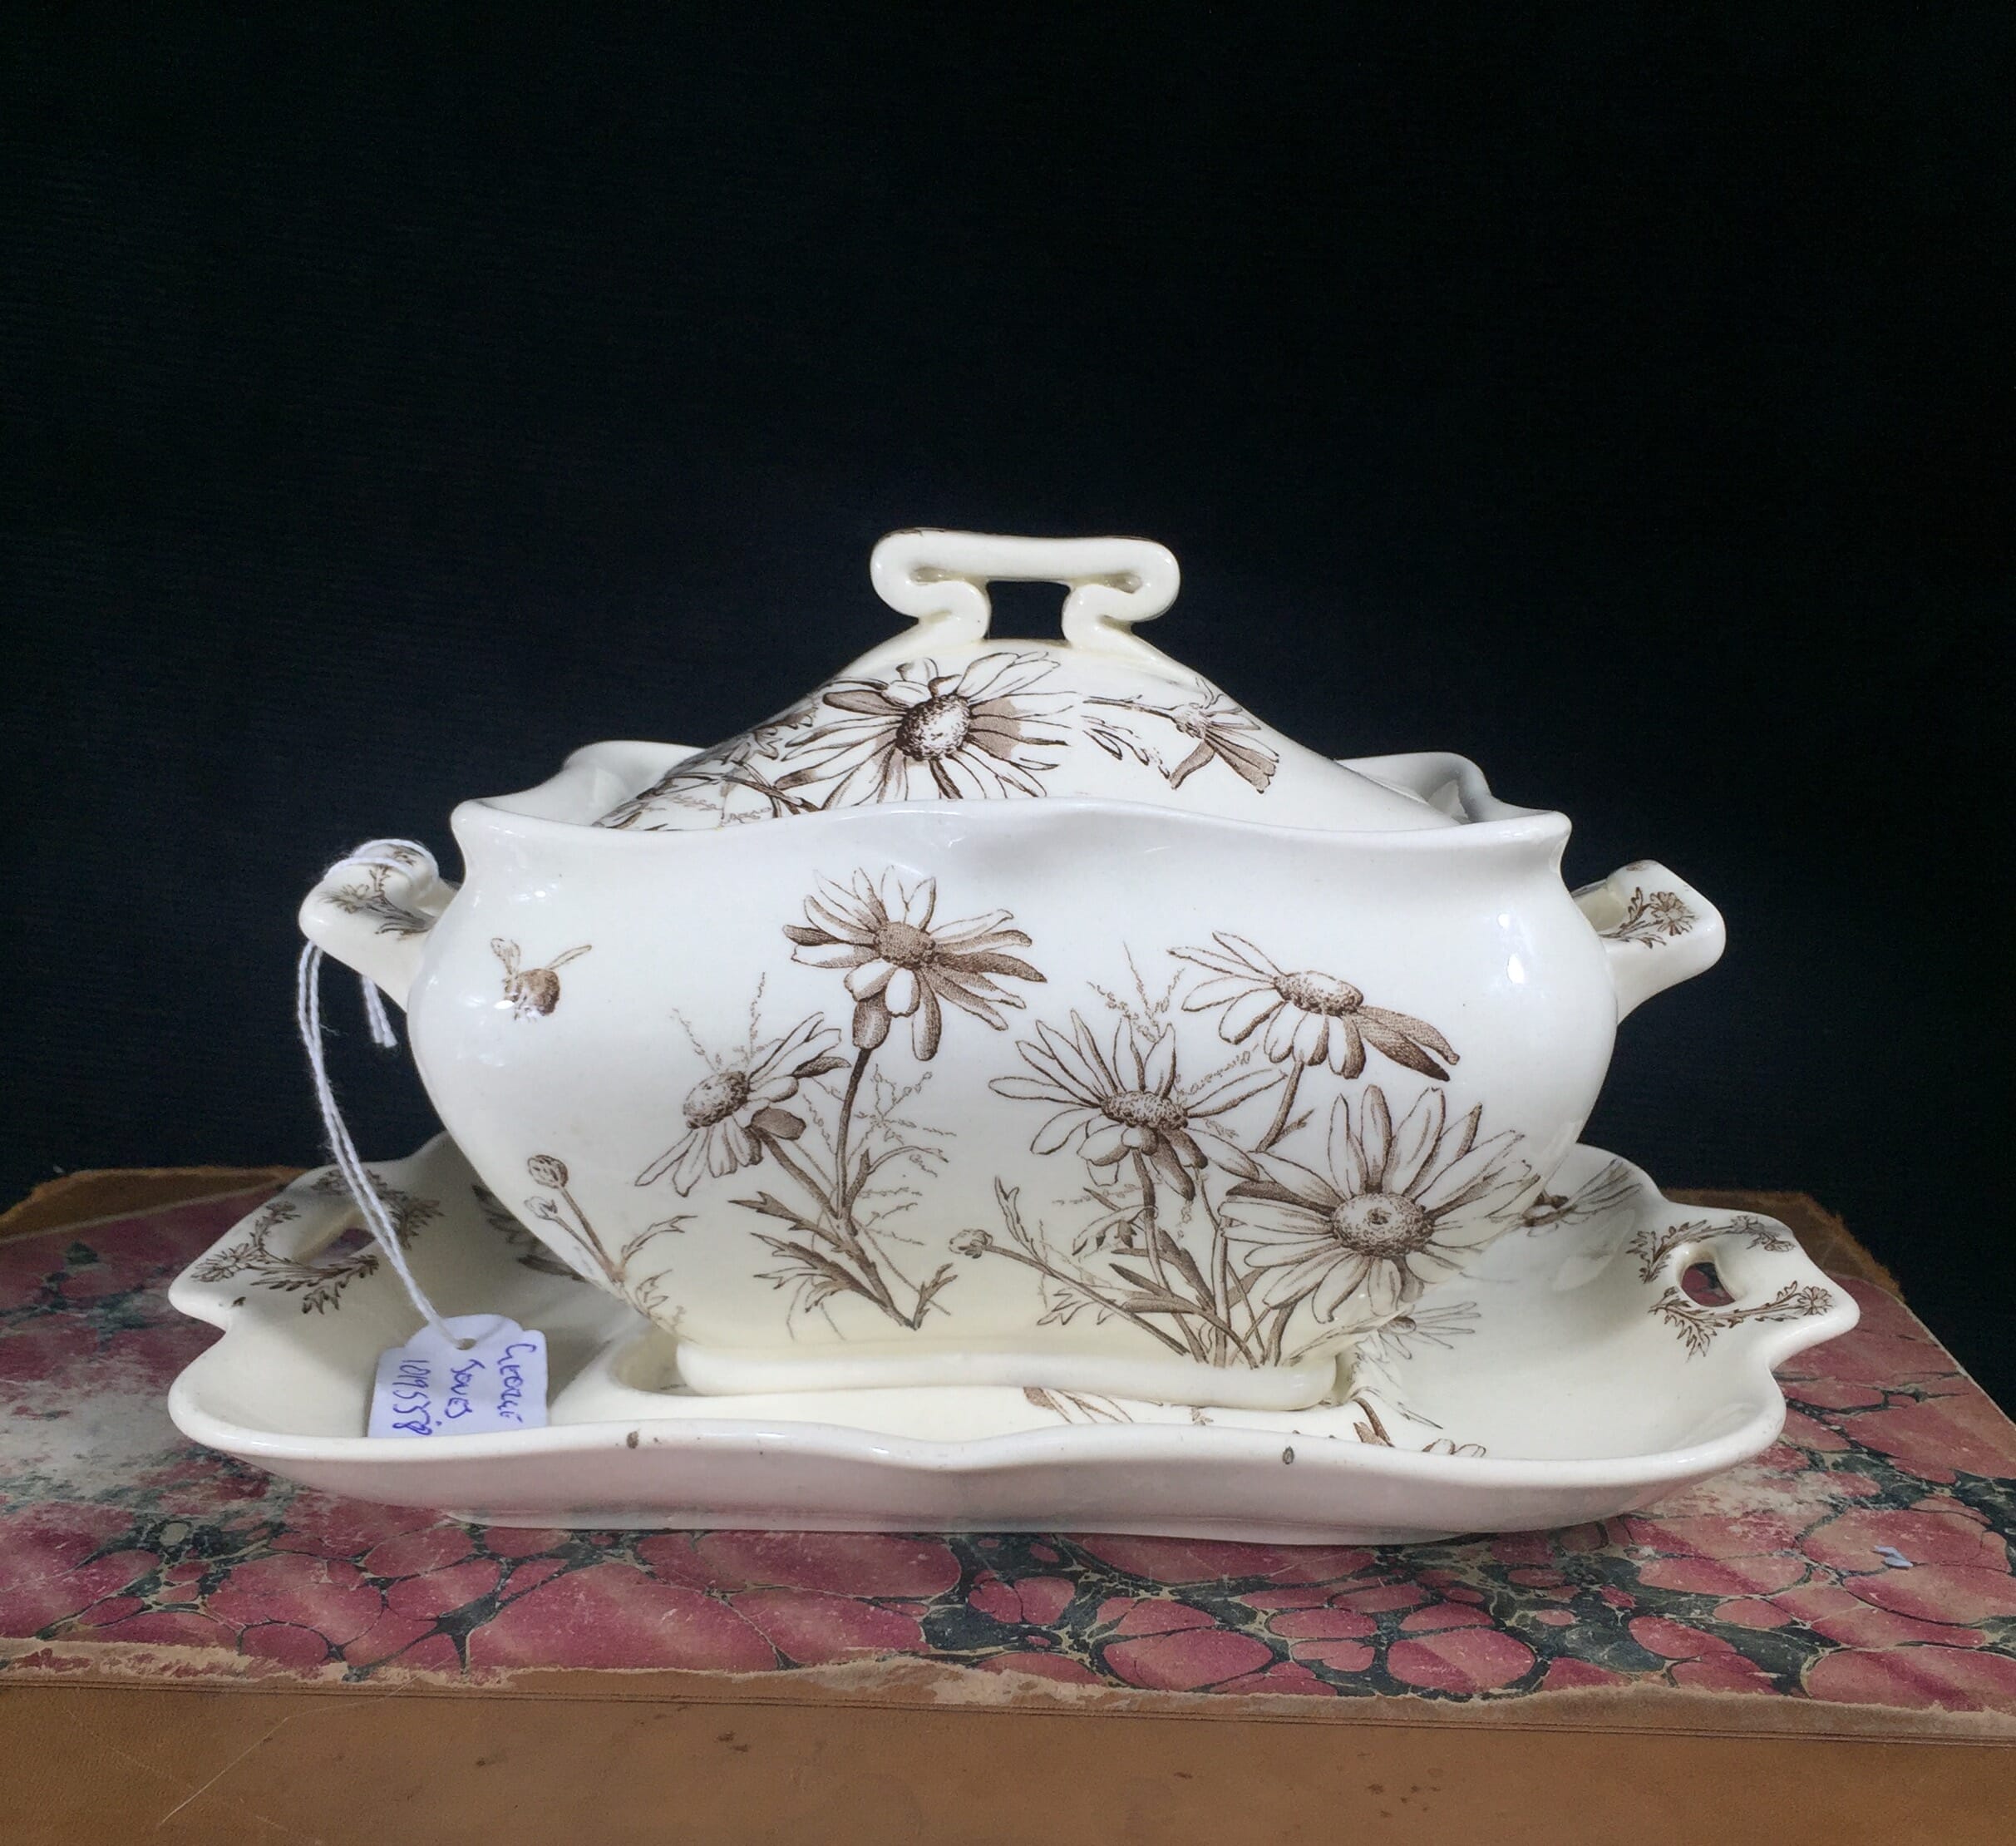 Small pottery tureen & stand decorated with daisies and bees by George Jones, registered 1884-0